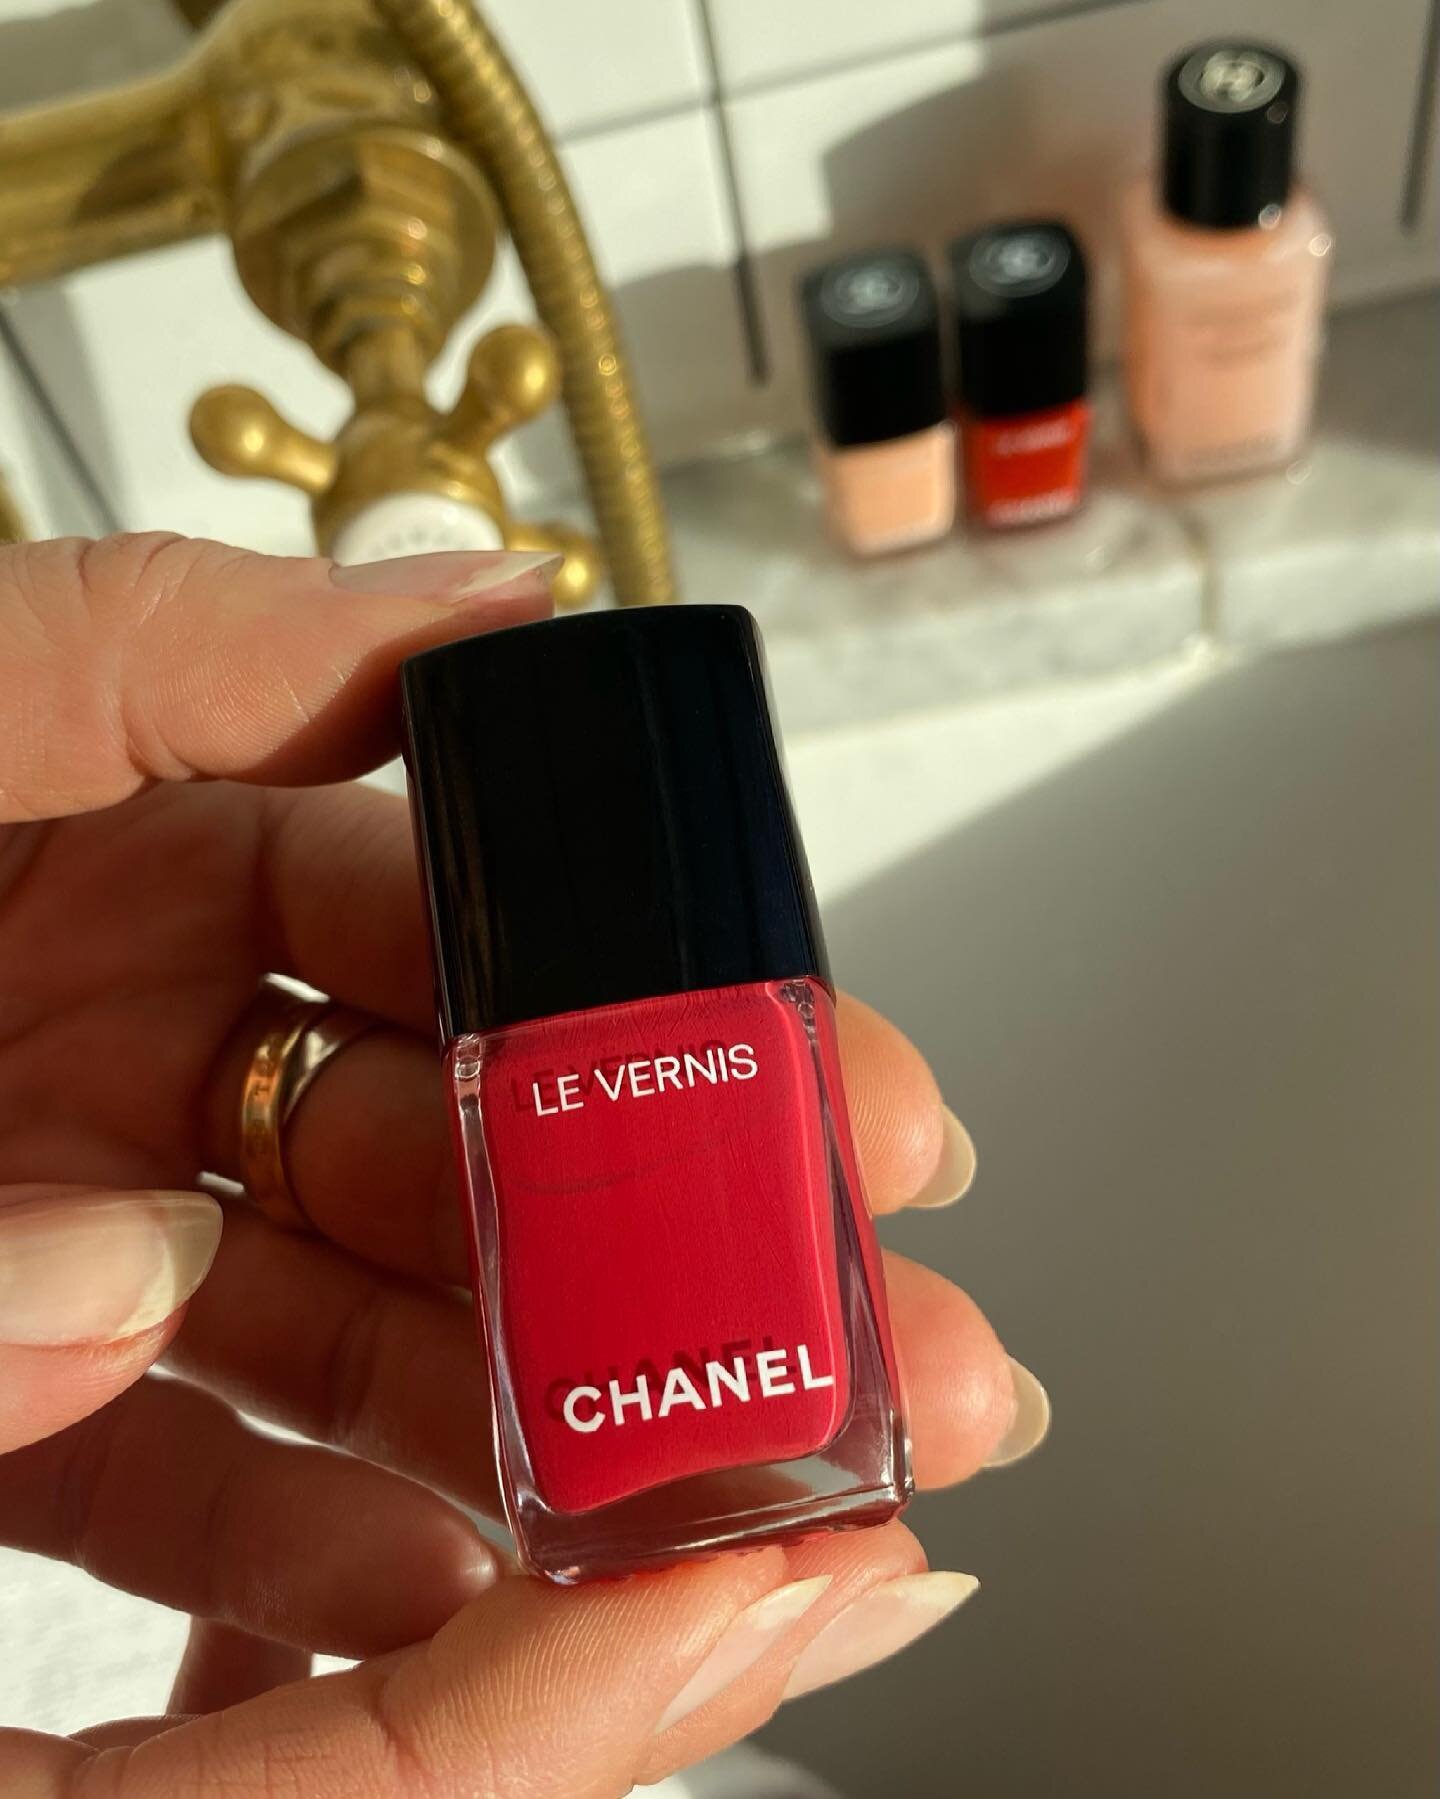 For a rosy spring transitional shade - @chanel.beauty ANTHURIUM

With sister shades METALLIC BLOOM and PENS&Eacute;E #chanelLEVERNIS #welovecoco #giftfromchanel